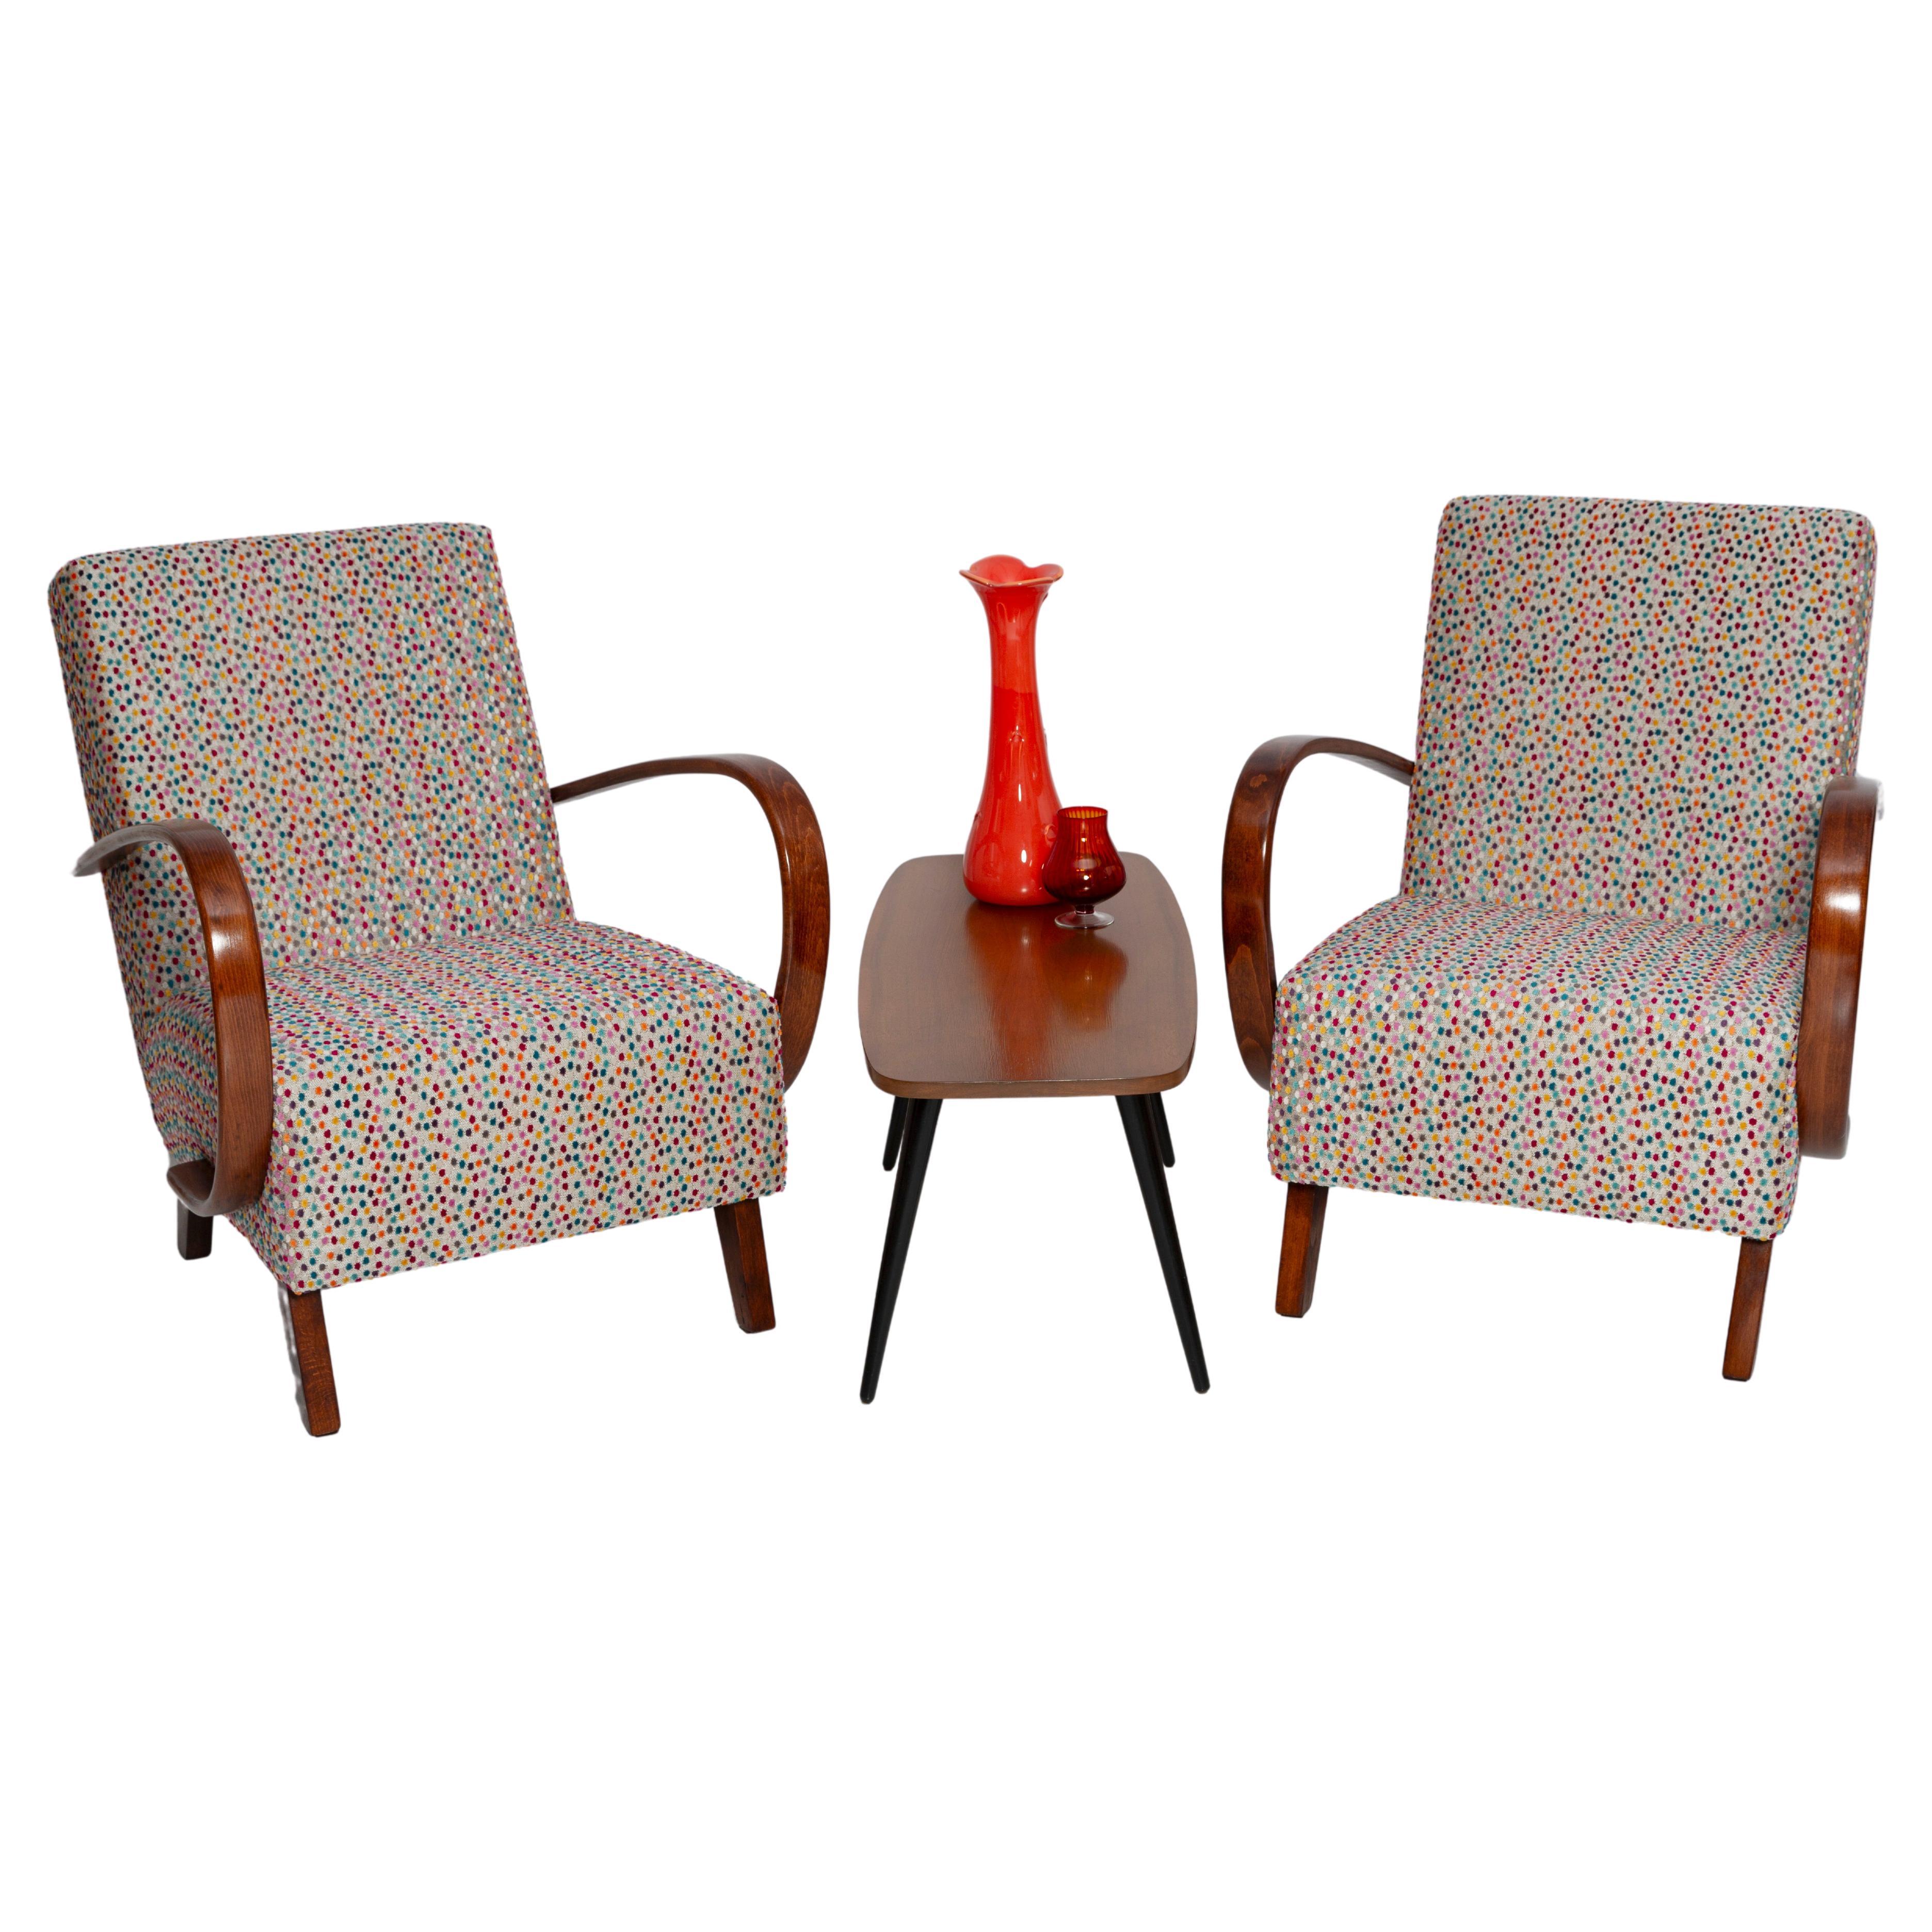 Two Mid Century Dots Velvet Armchairs and Table, Halabala Czech Republic, 1950s For Sale